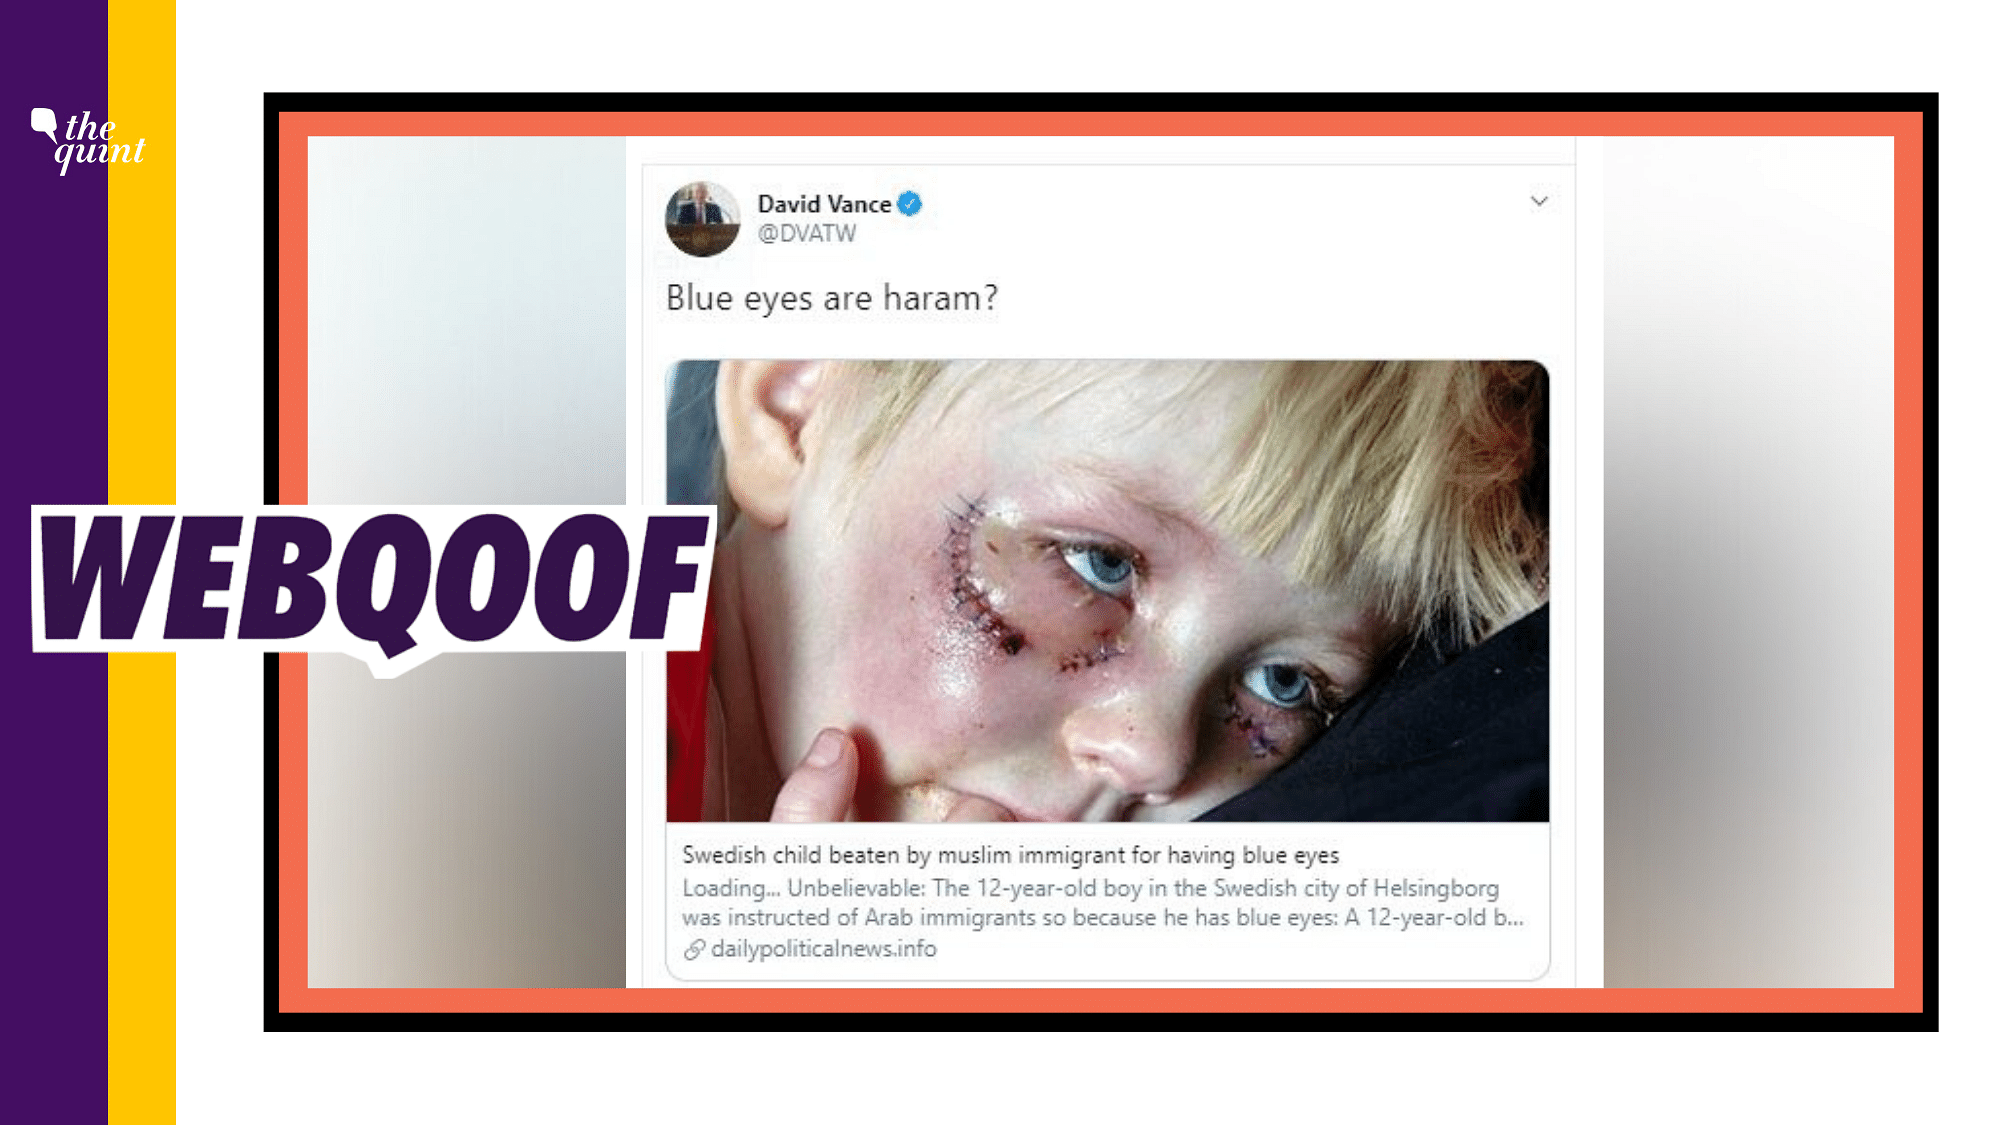 A graphic image of a dog attack victim is being shared as a Swedish child attacked by Muslim immigrants for having blue eyes.&nbsp;